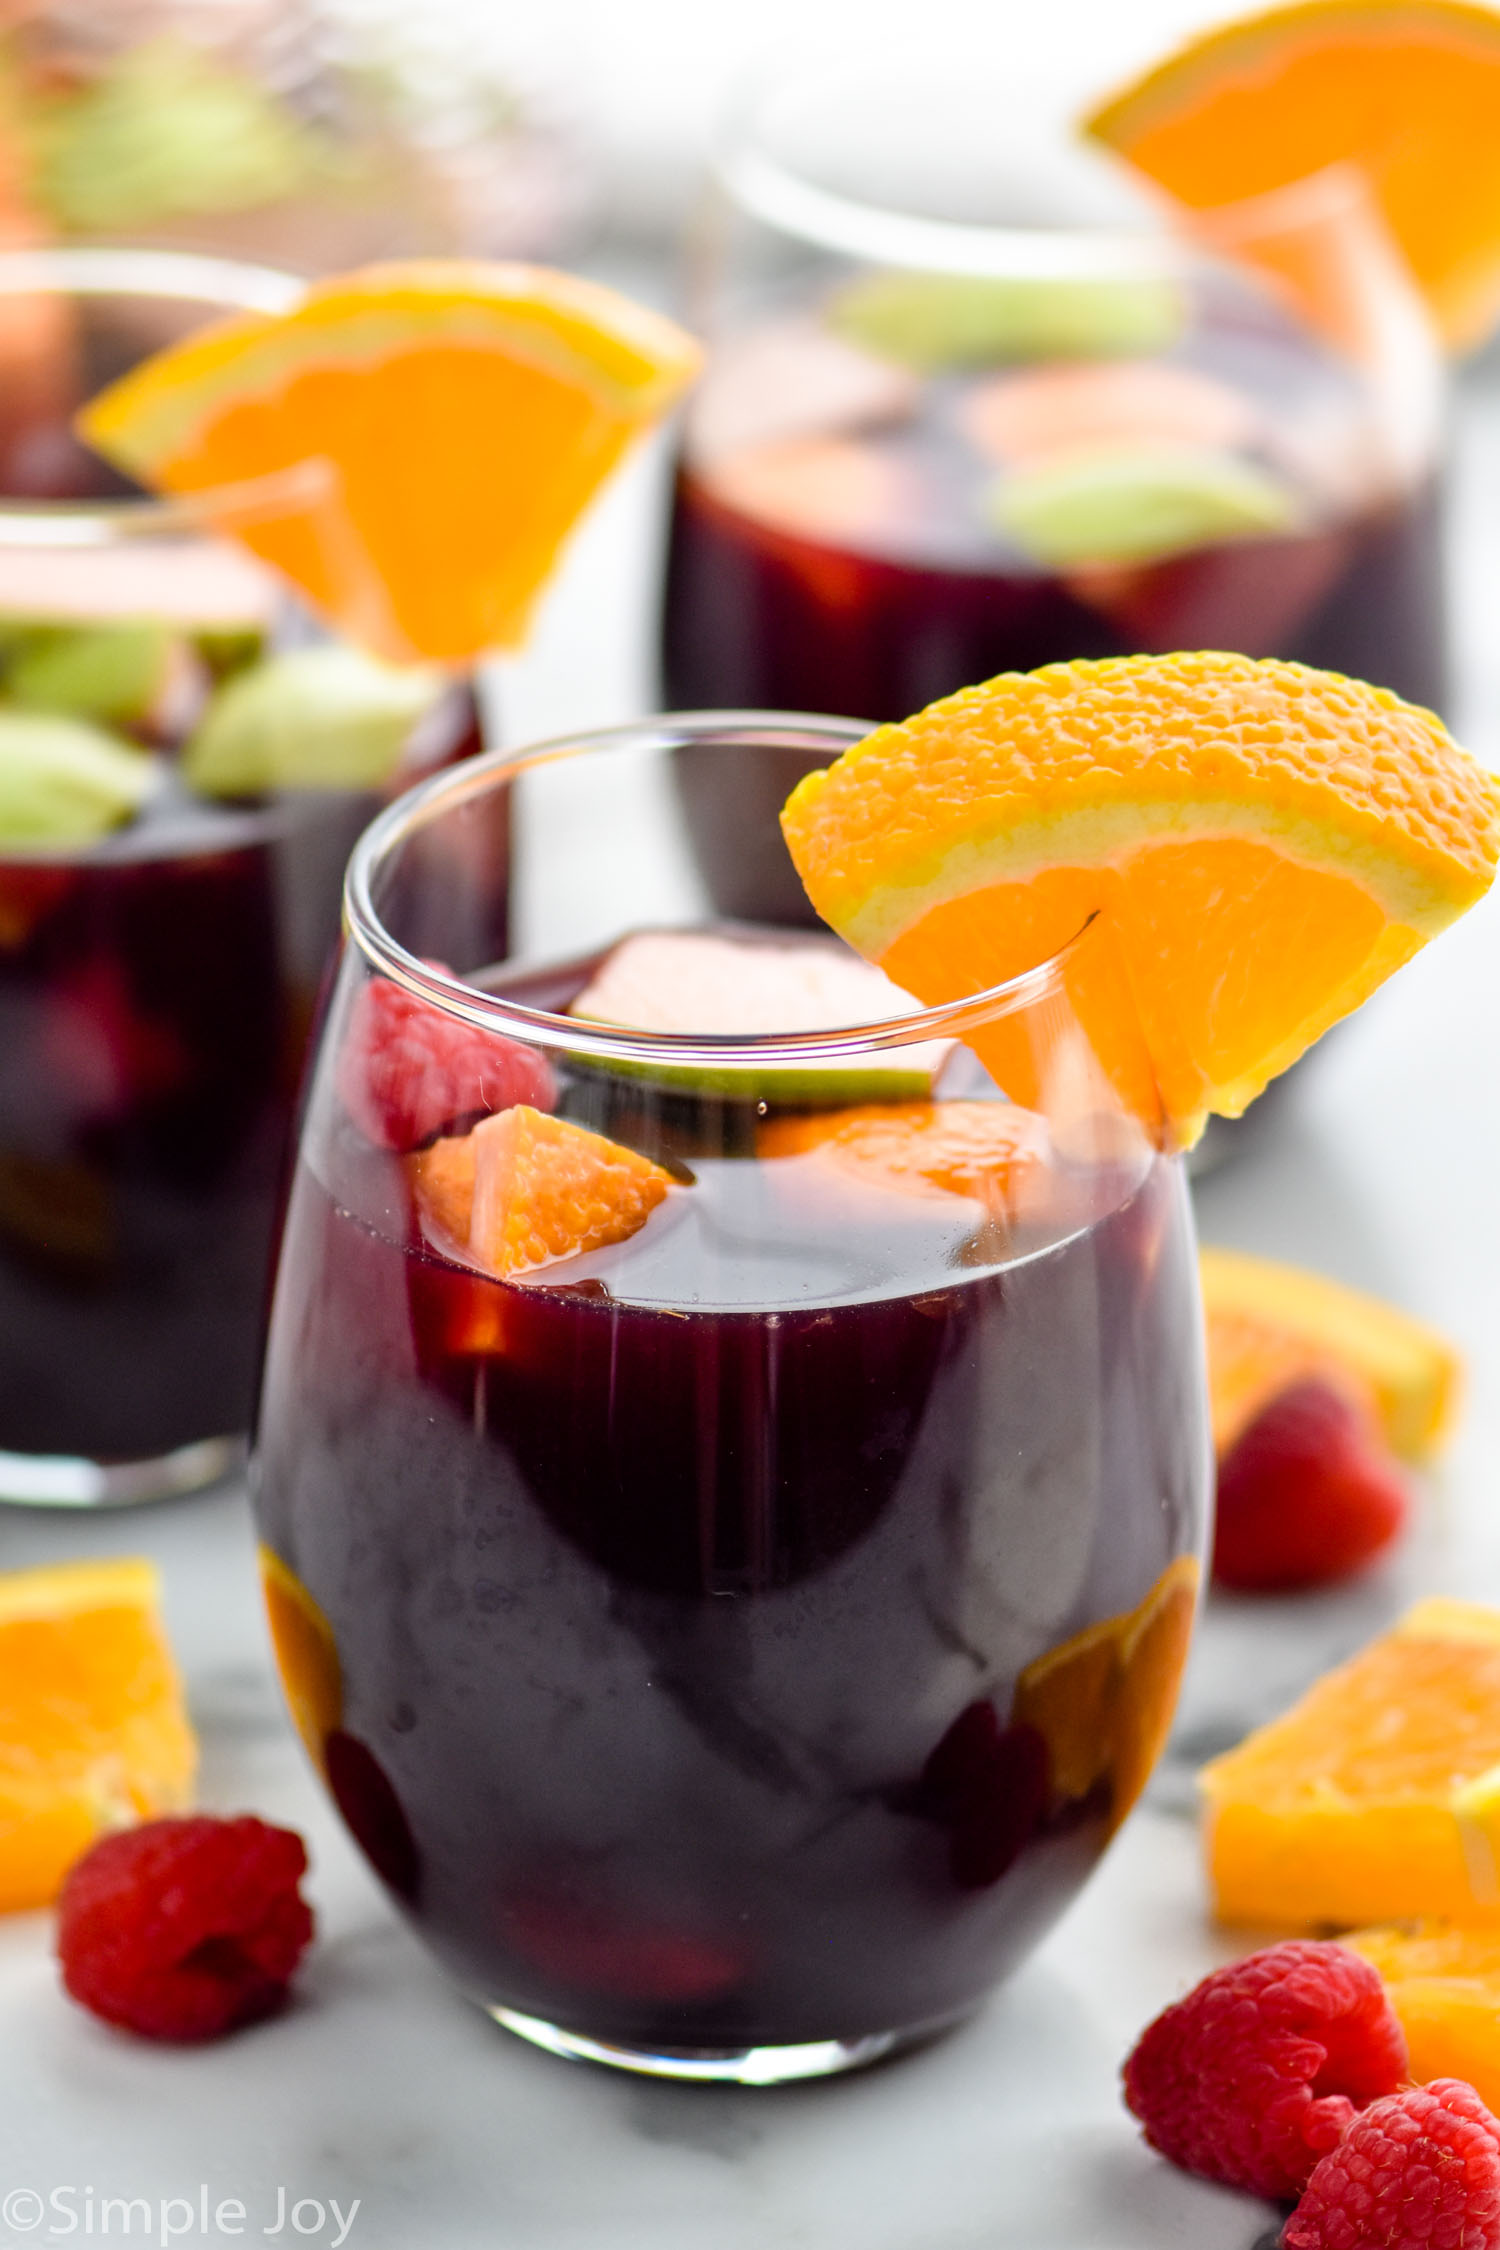 Easy Sangria Recipe - How to Make Red Sangria - The Forked Spoon